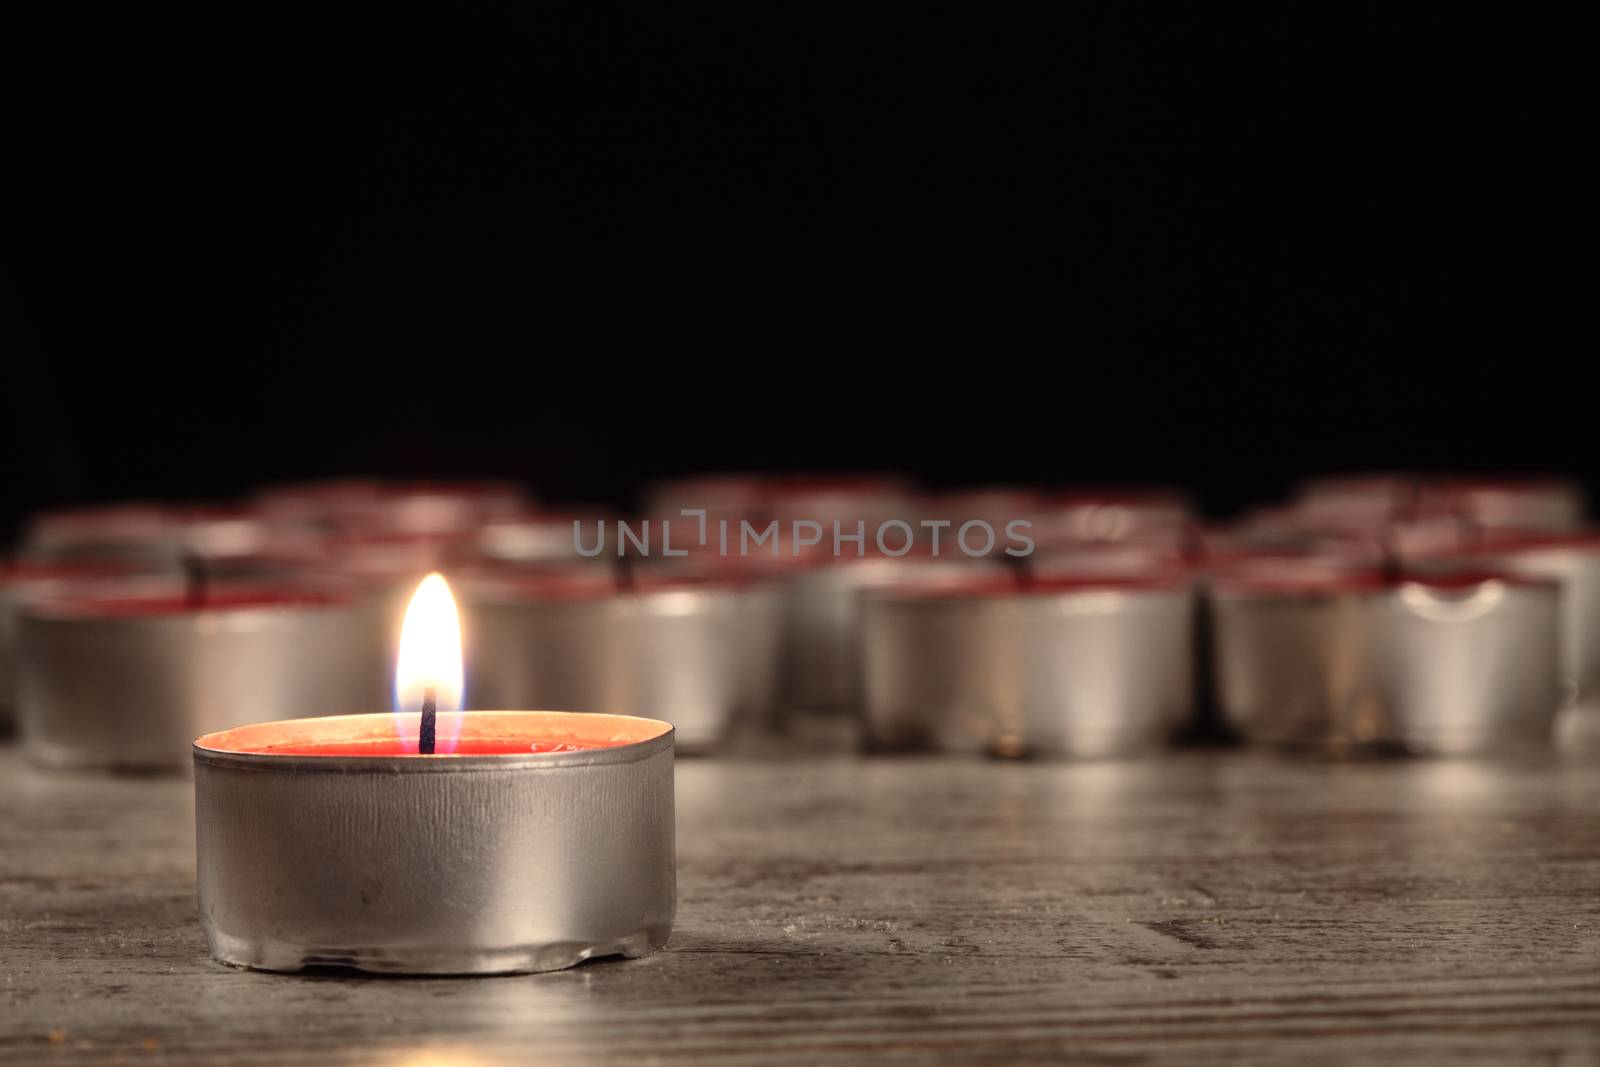 red candle on a wooden floor